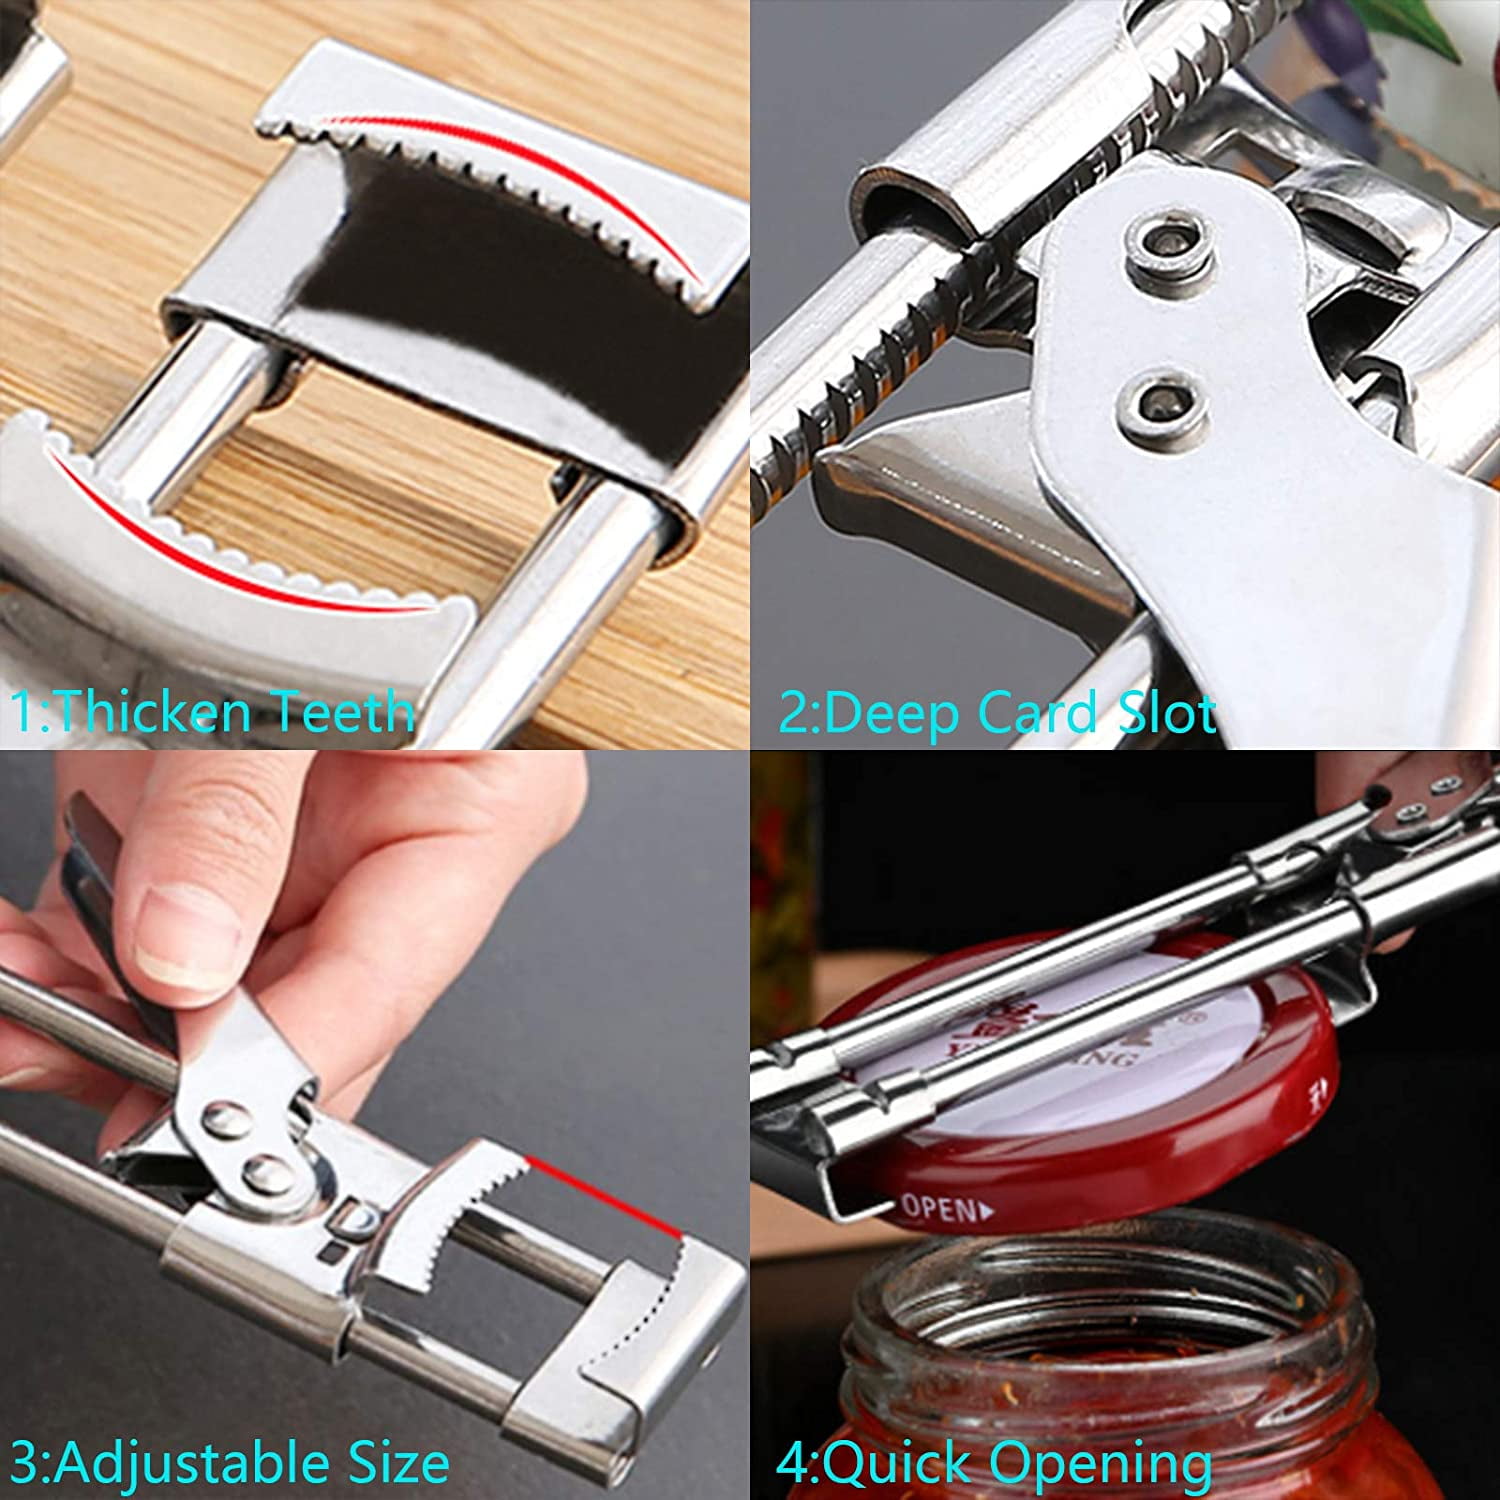  Ailsion Jar Opener,Adjustable Stainless Steel Can Opener Bottle  Opener,Gripper,Manual Bottle Opener,Portable Kitchen Accessories (2,Small  size) : Home & Kitchen